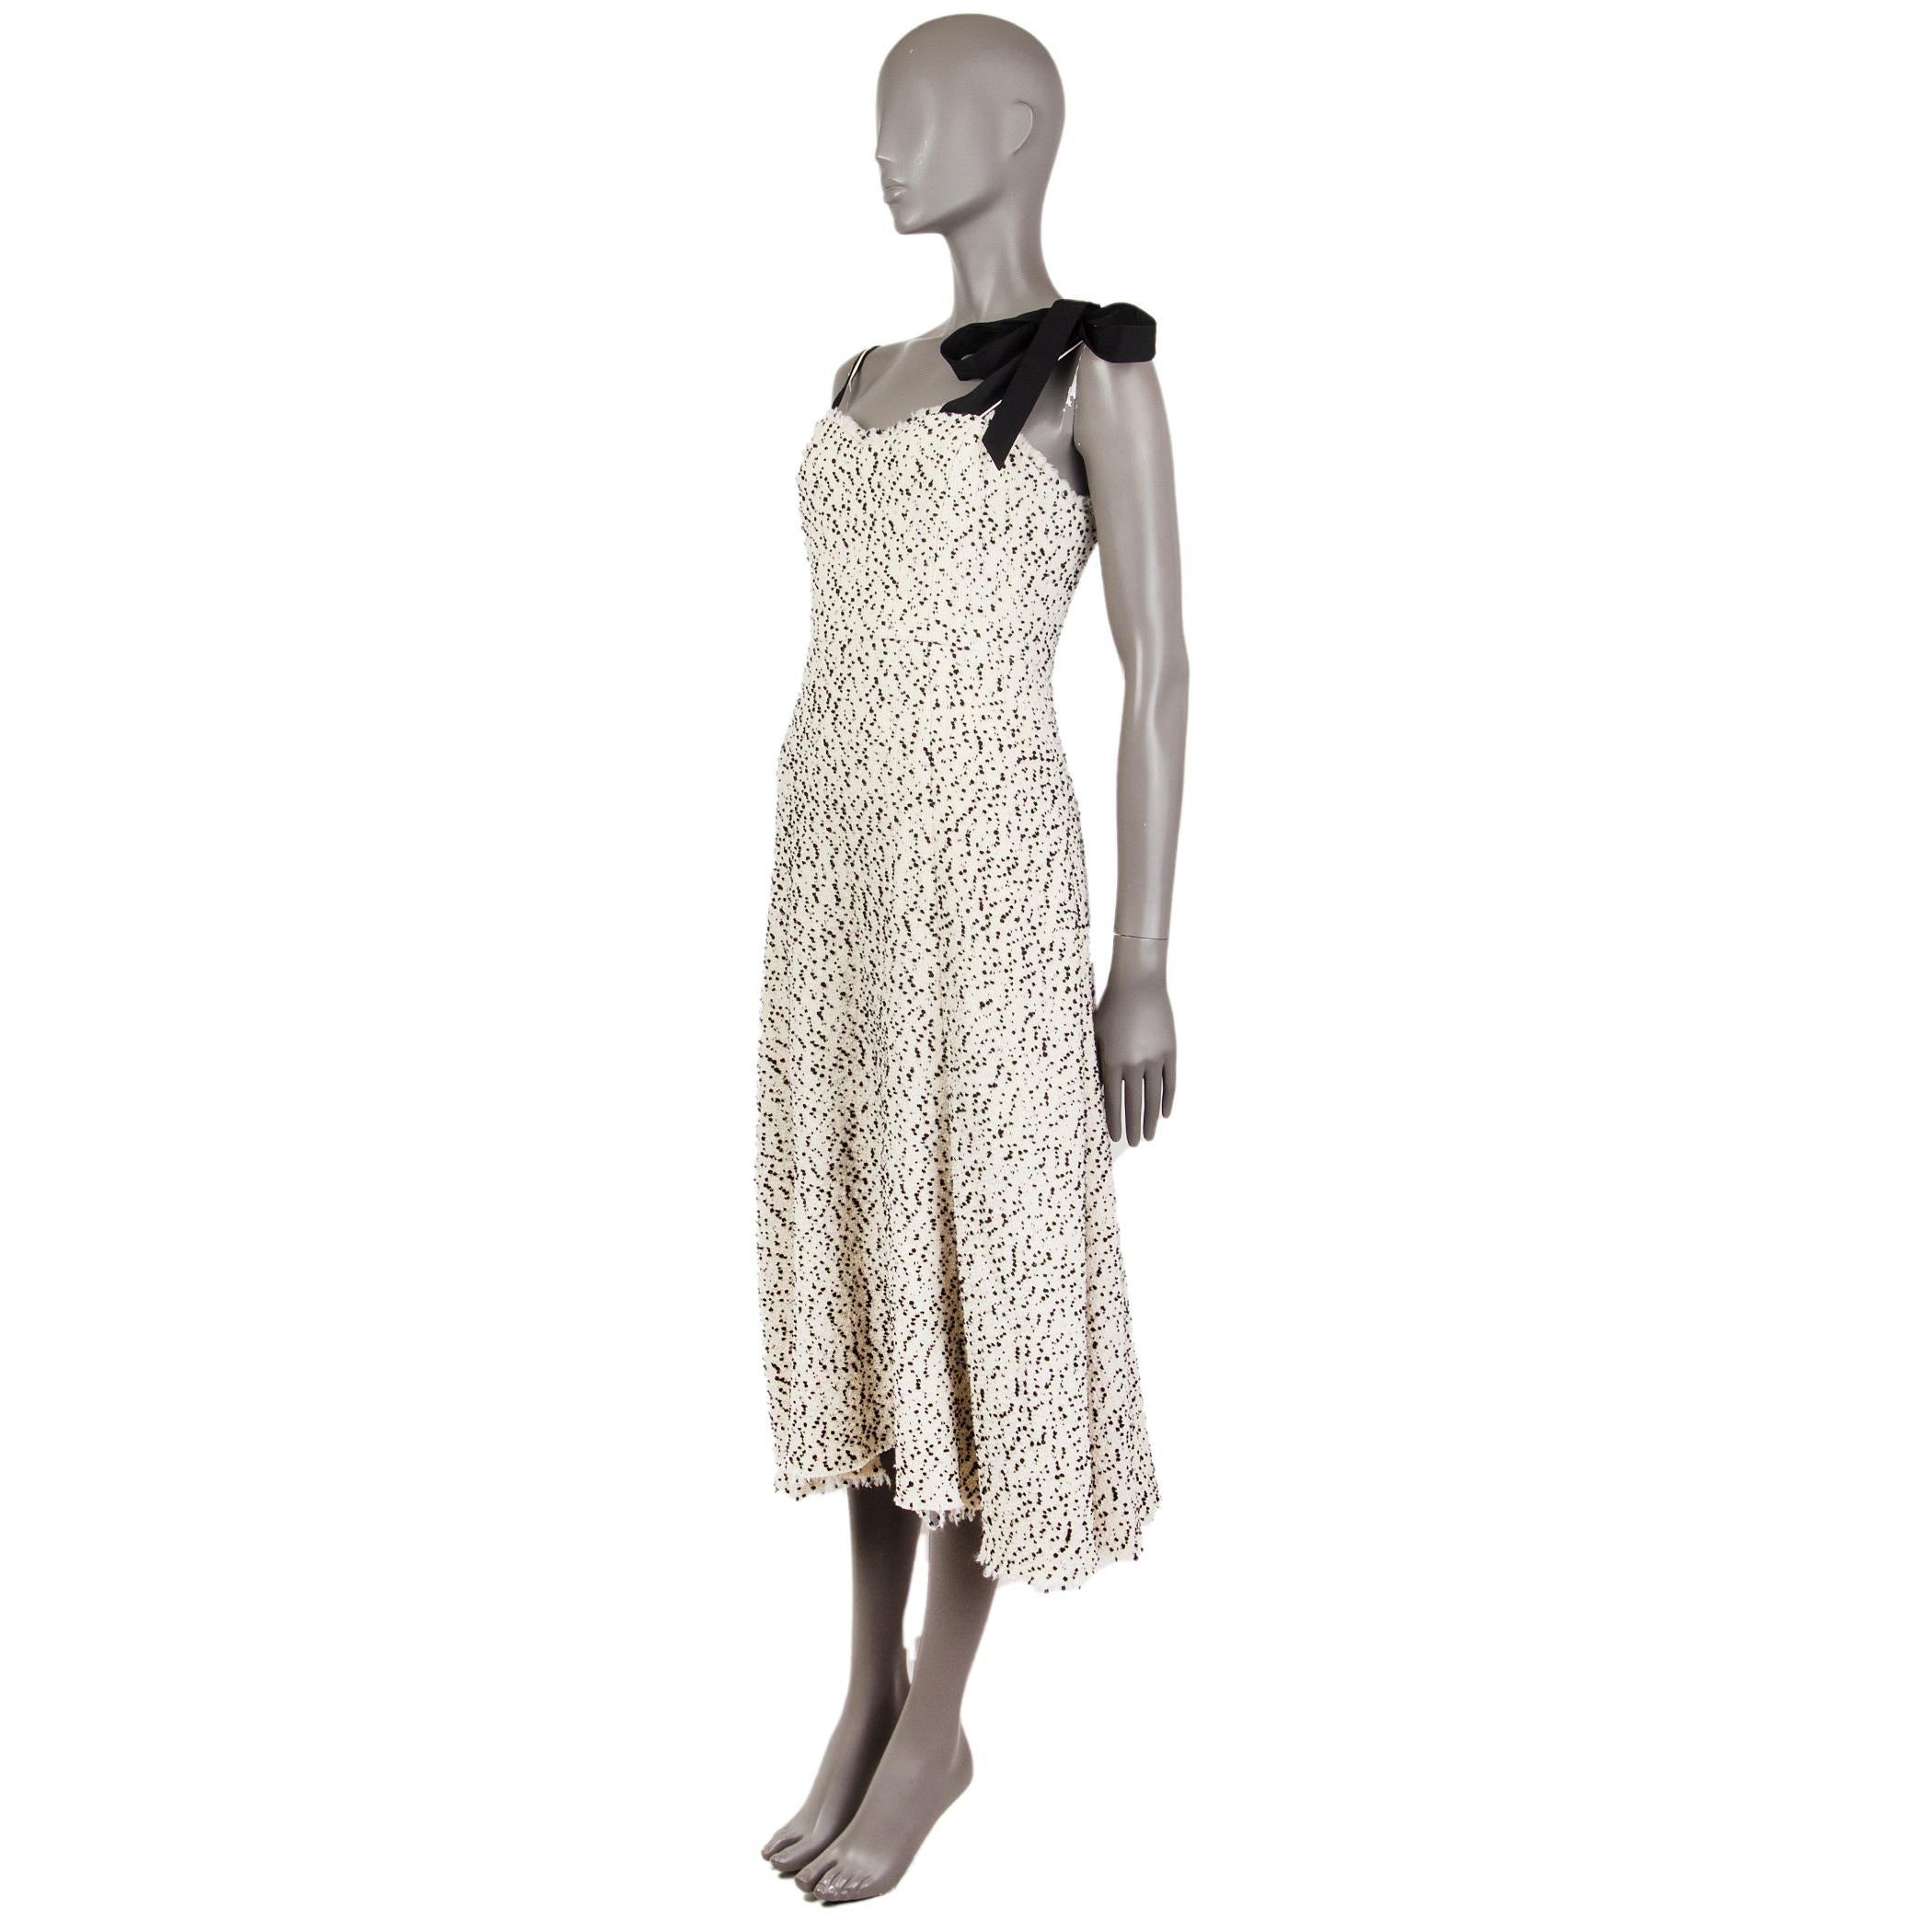 100% authentic Rosie Assoulin dalmatian-tweed dress in off-white and black wool (81%), patac (8%), nylon (5%), polyester (5%), and lycra (1%). With frey trims, one spaghetti strap, ribbon straps on the other shoulder, sweetheart neckline, and flared